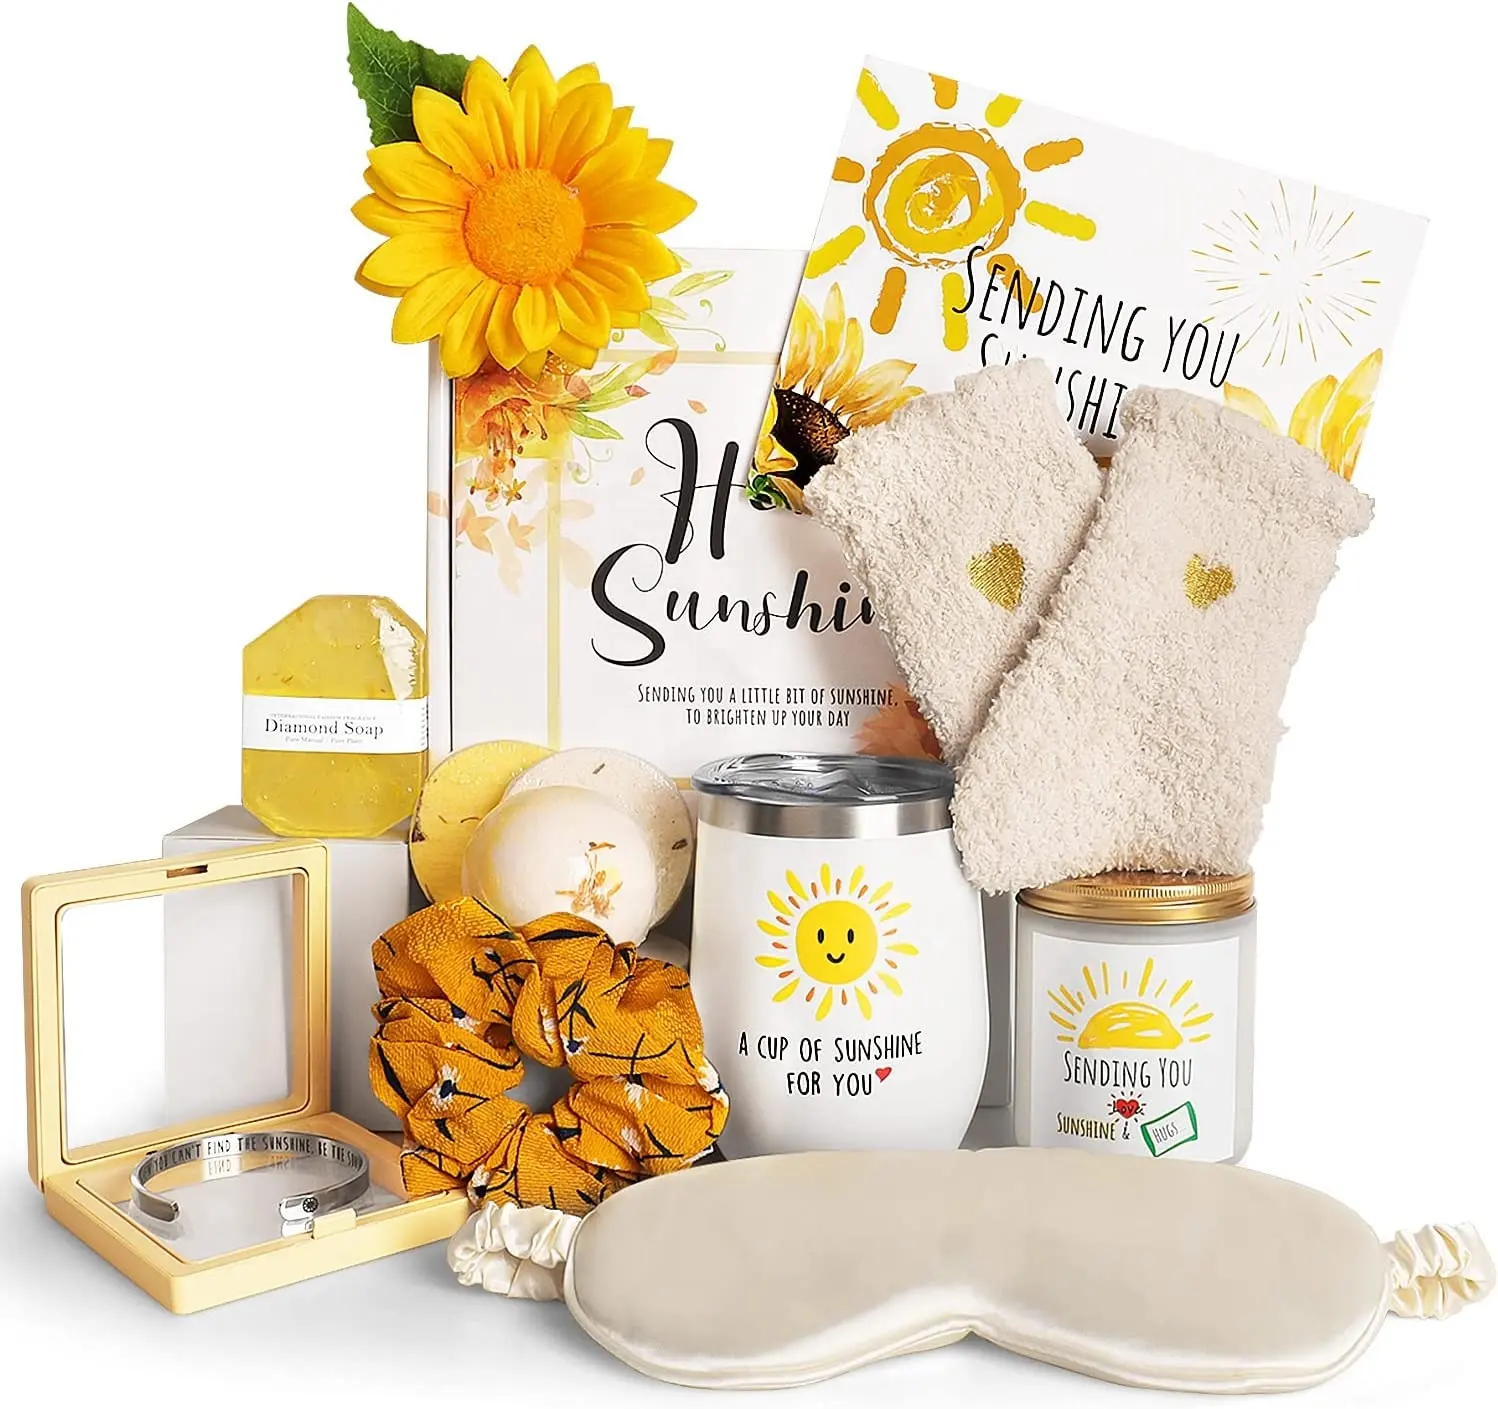 Birthday Gifts Sunflower Sending Sunshine Get Well Soon Gifts Basket Care Package Unique Relaxation Gifts Box